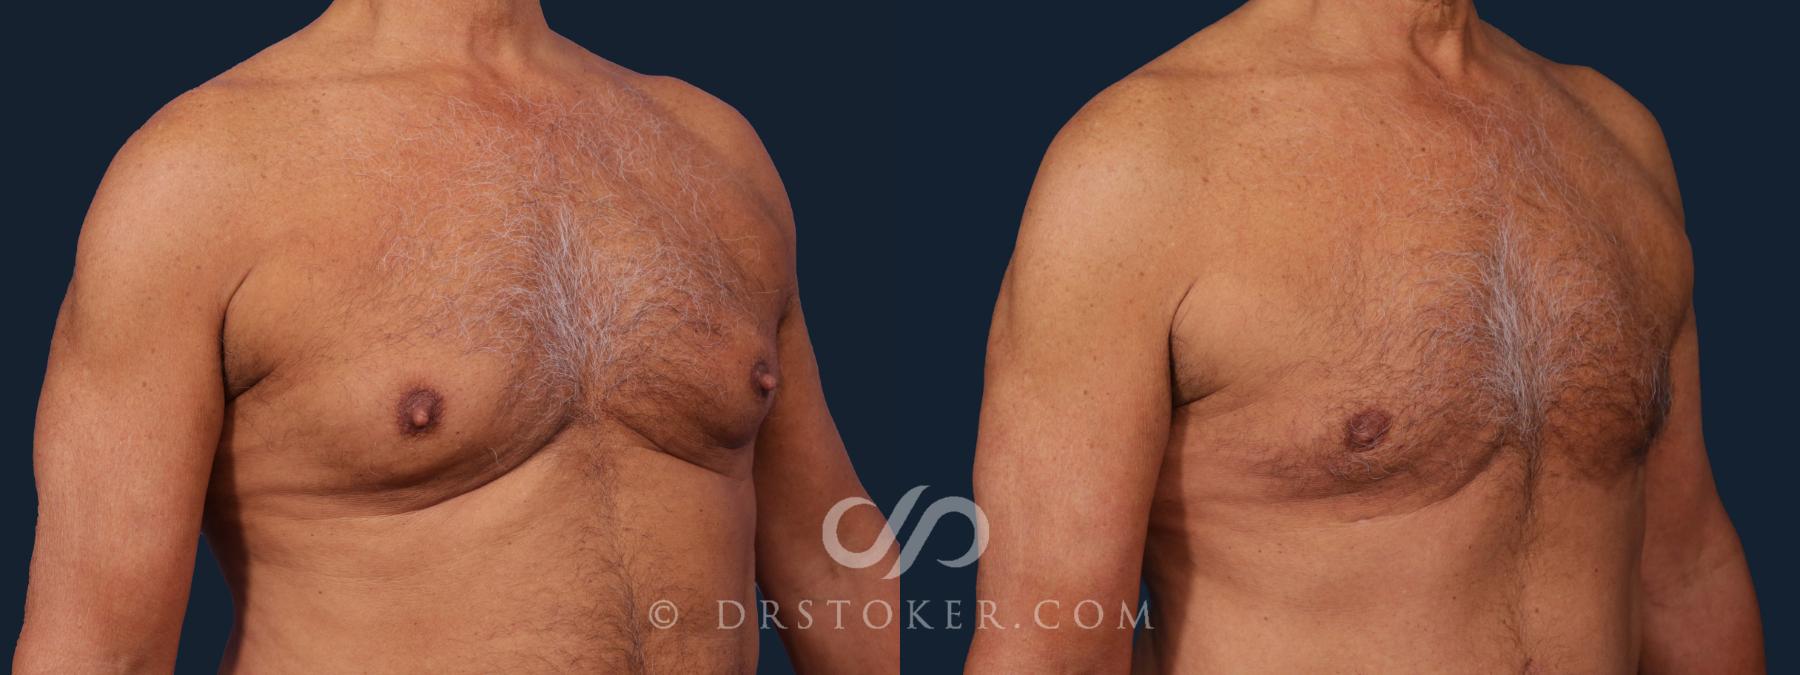 Before & After Breast Reduction for Men (Gynecomastia) Case 2023 Right Oblique View in Los Angeles, CA